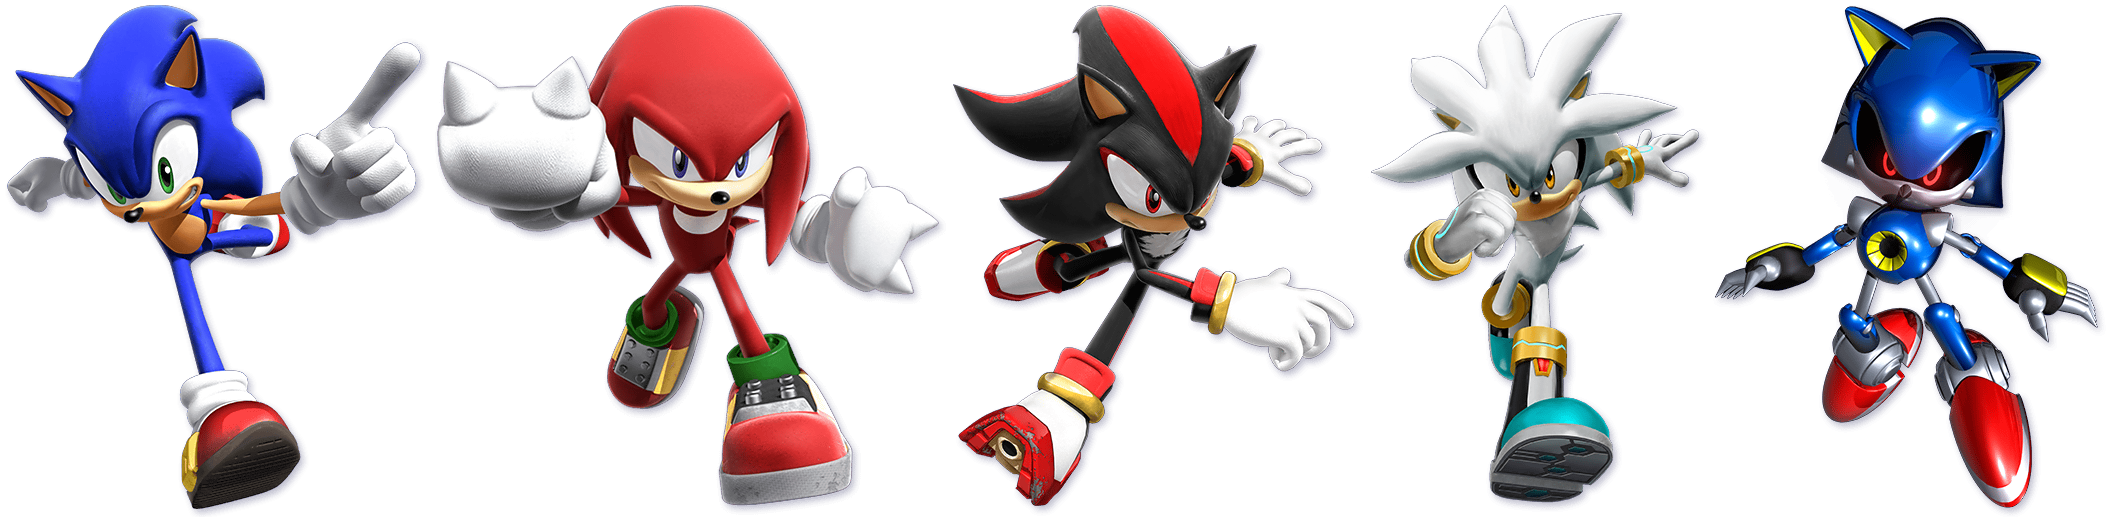 Sonic Rivals - Large Renders